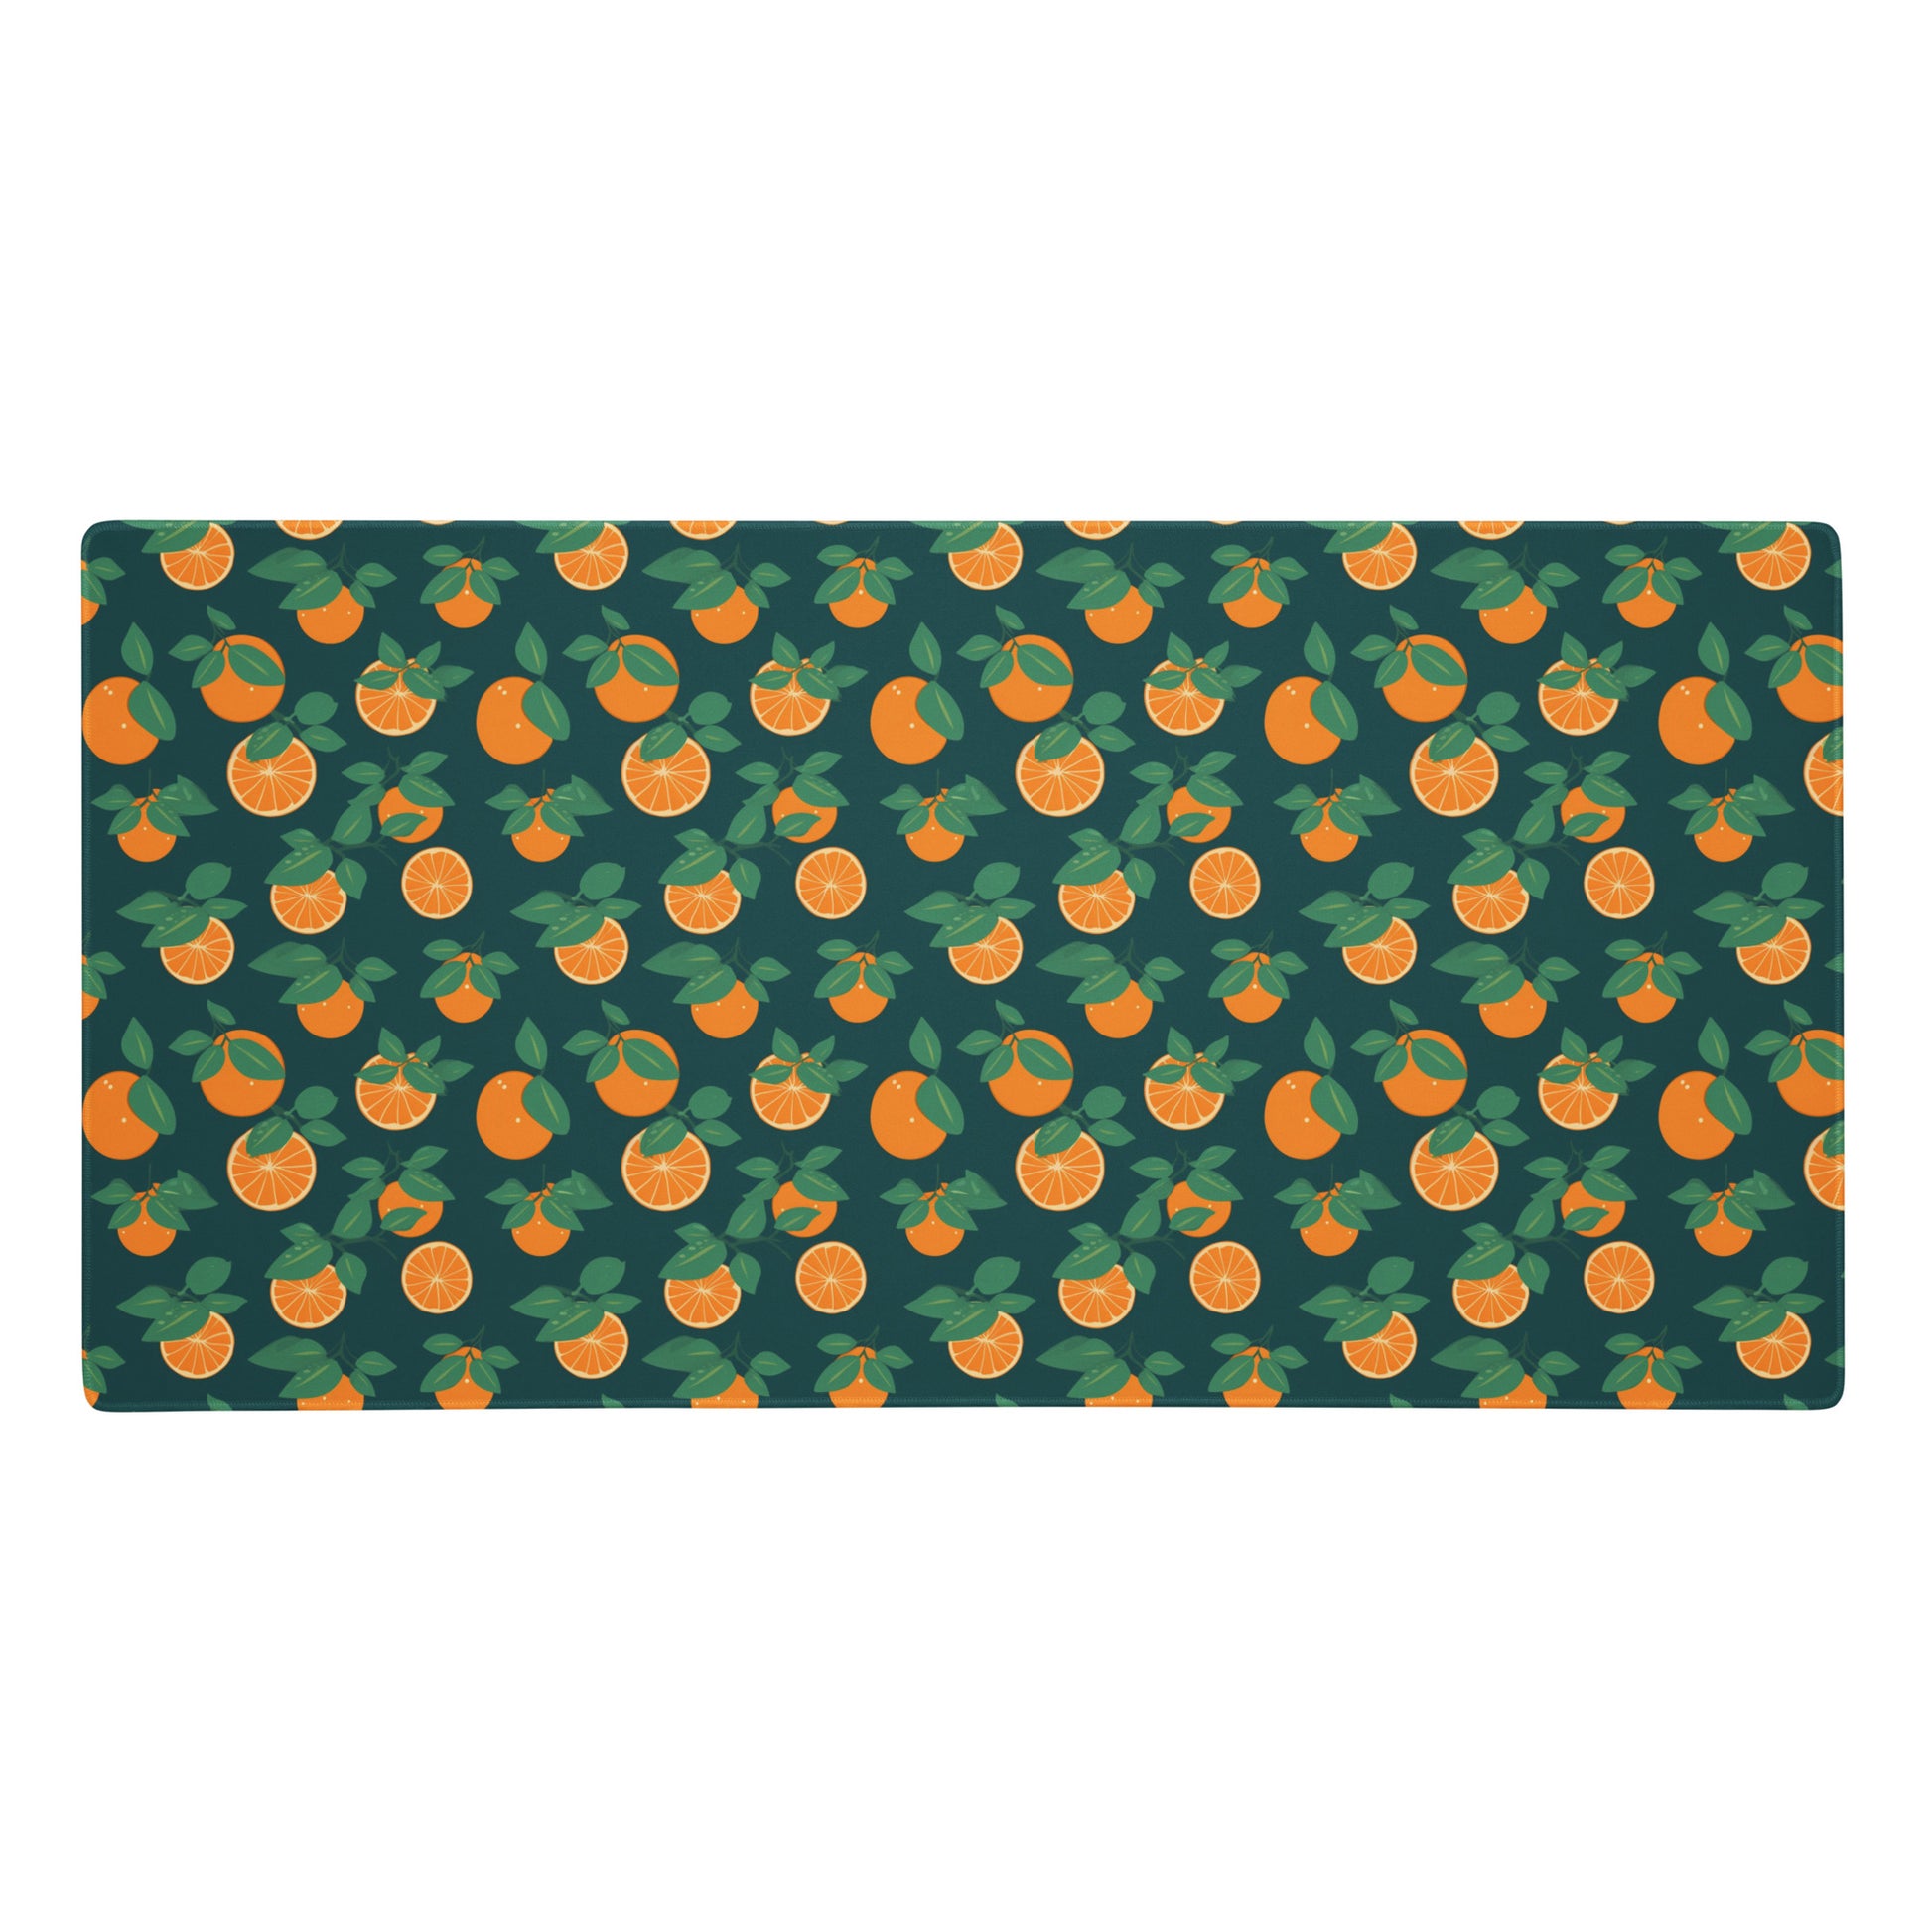 A 36" x 18" desk pad with oranges all over it. Orange and Blue in color.